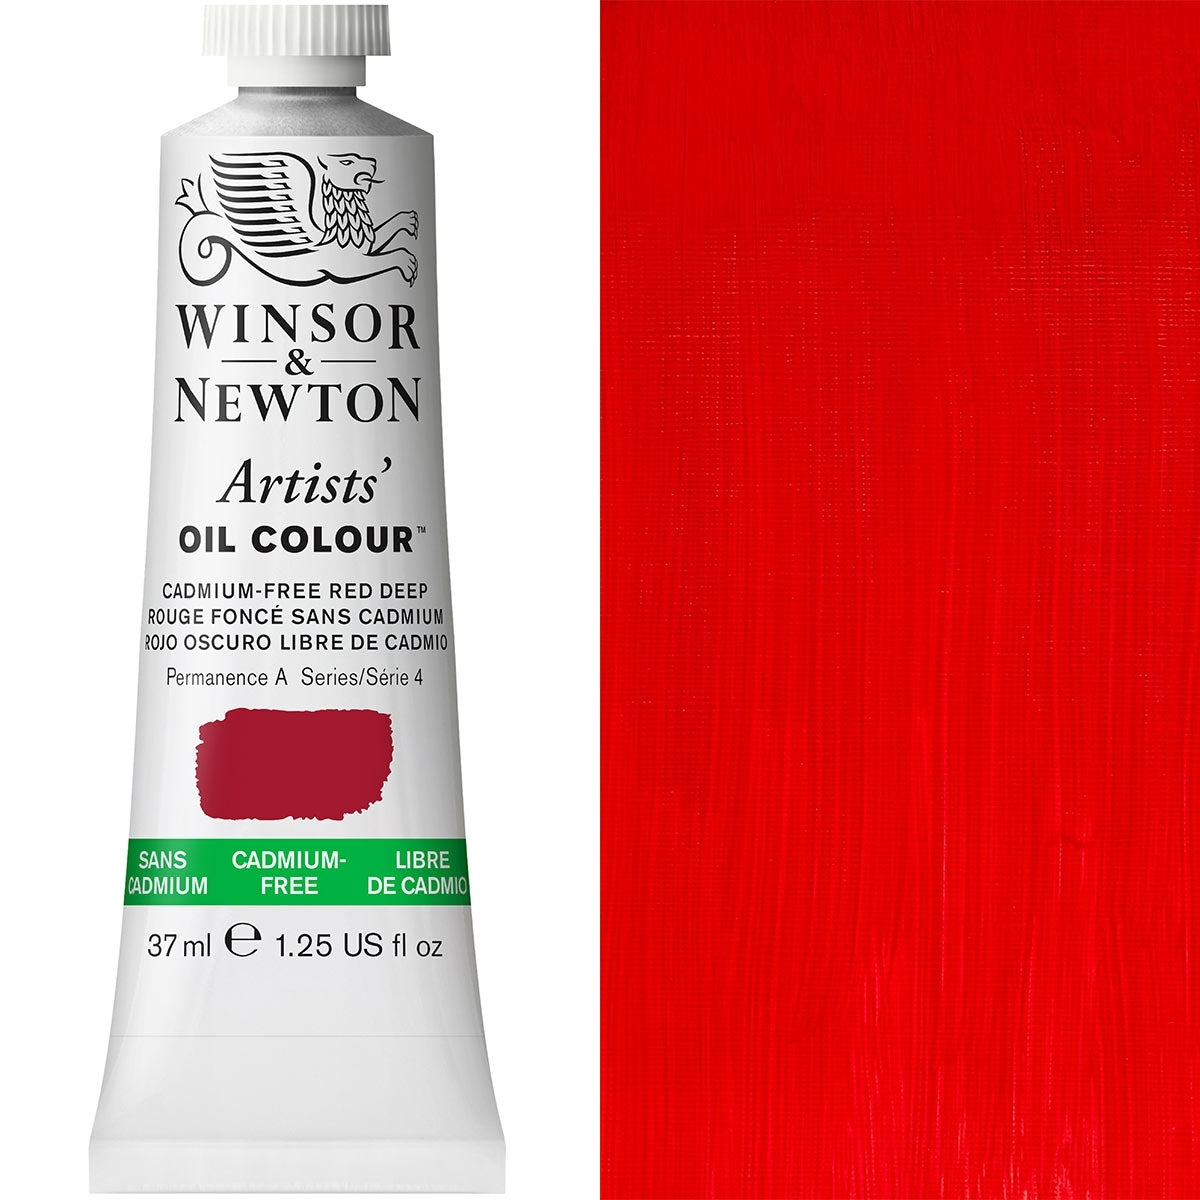 Winsor and Newton - Artists' Oil Colour - 37ml - Cad Free Red Deep